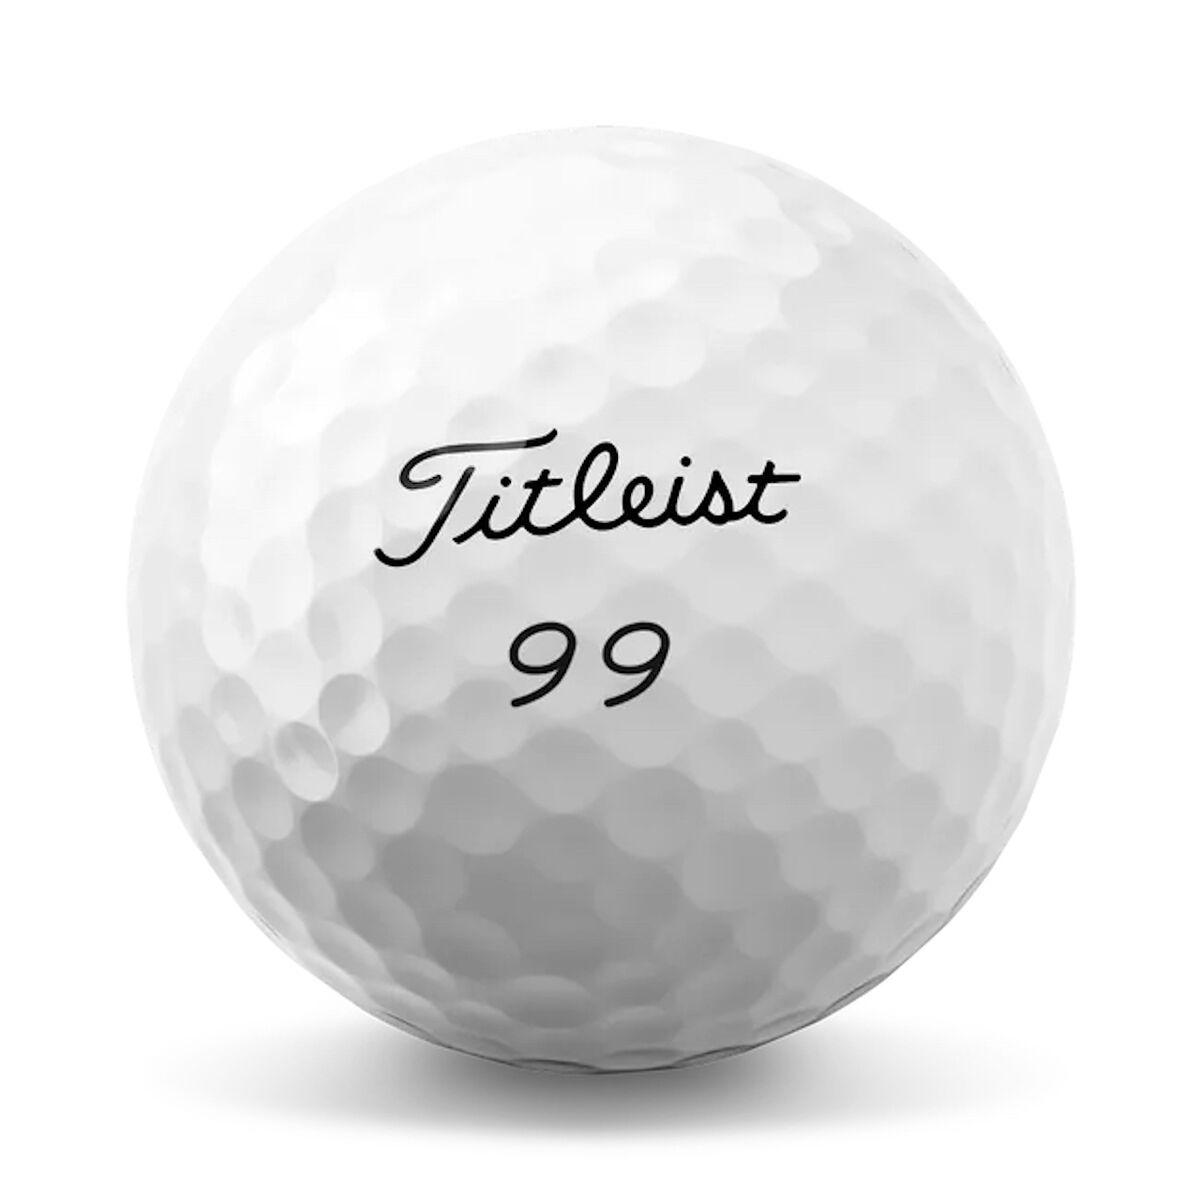 Titleist ball with number